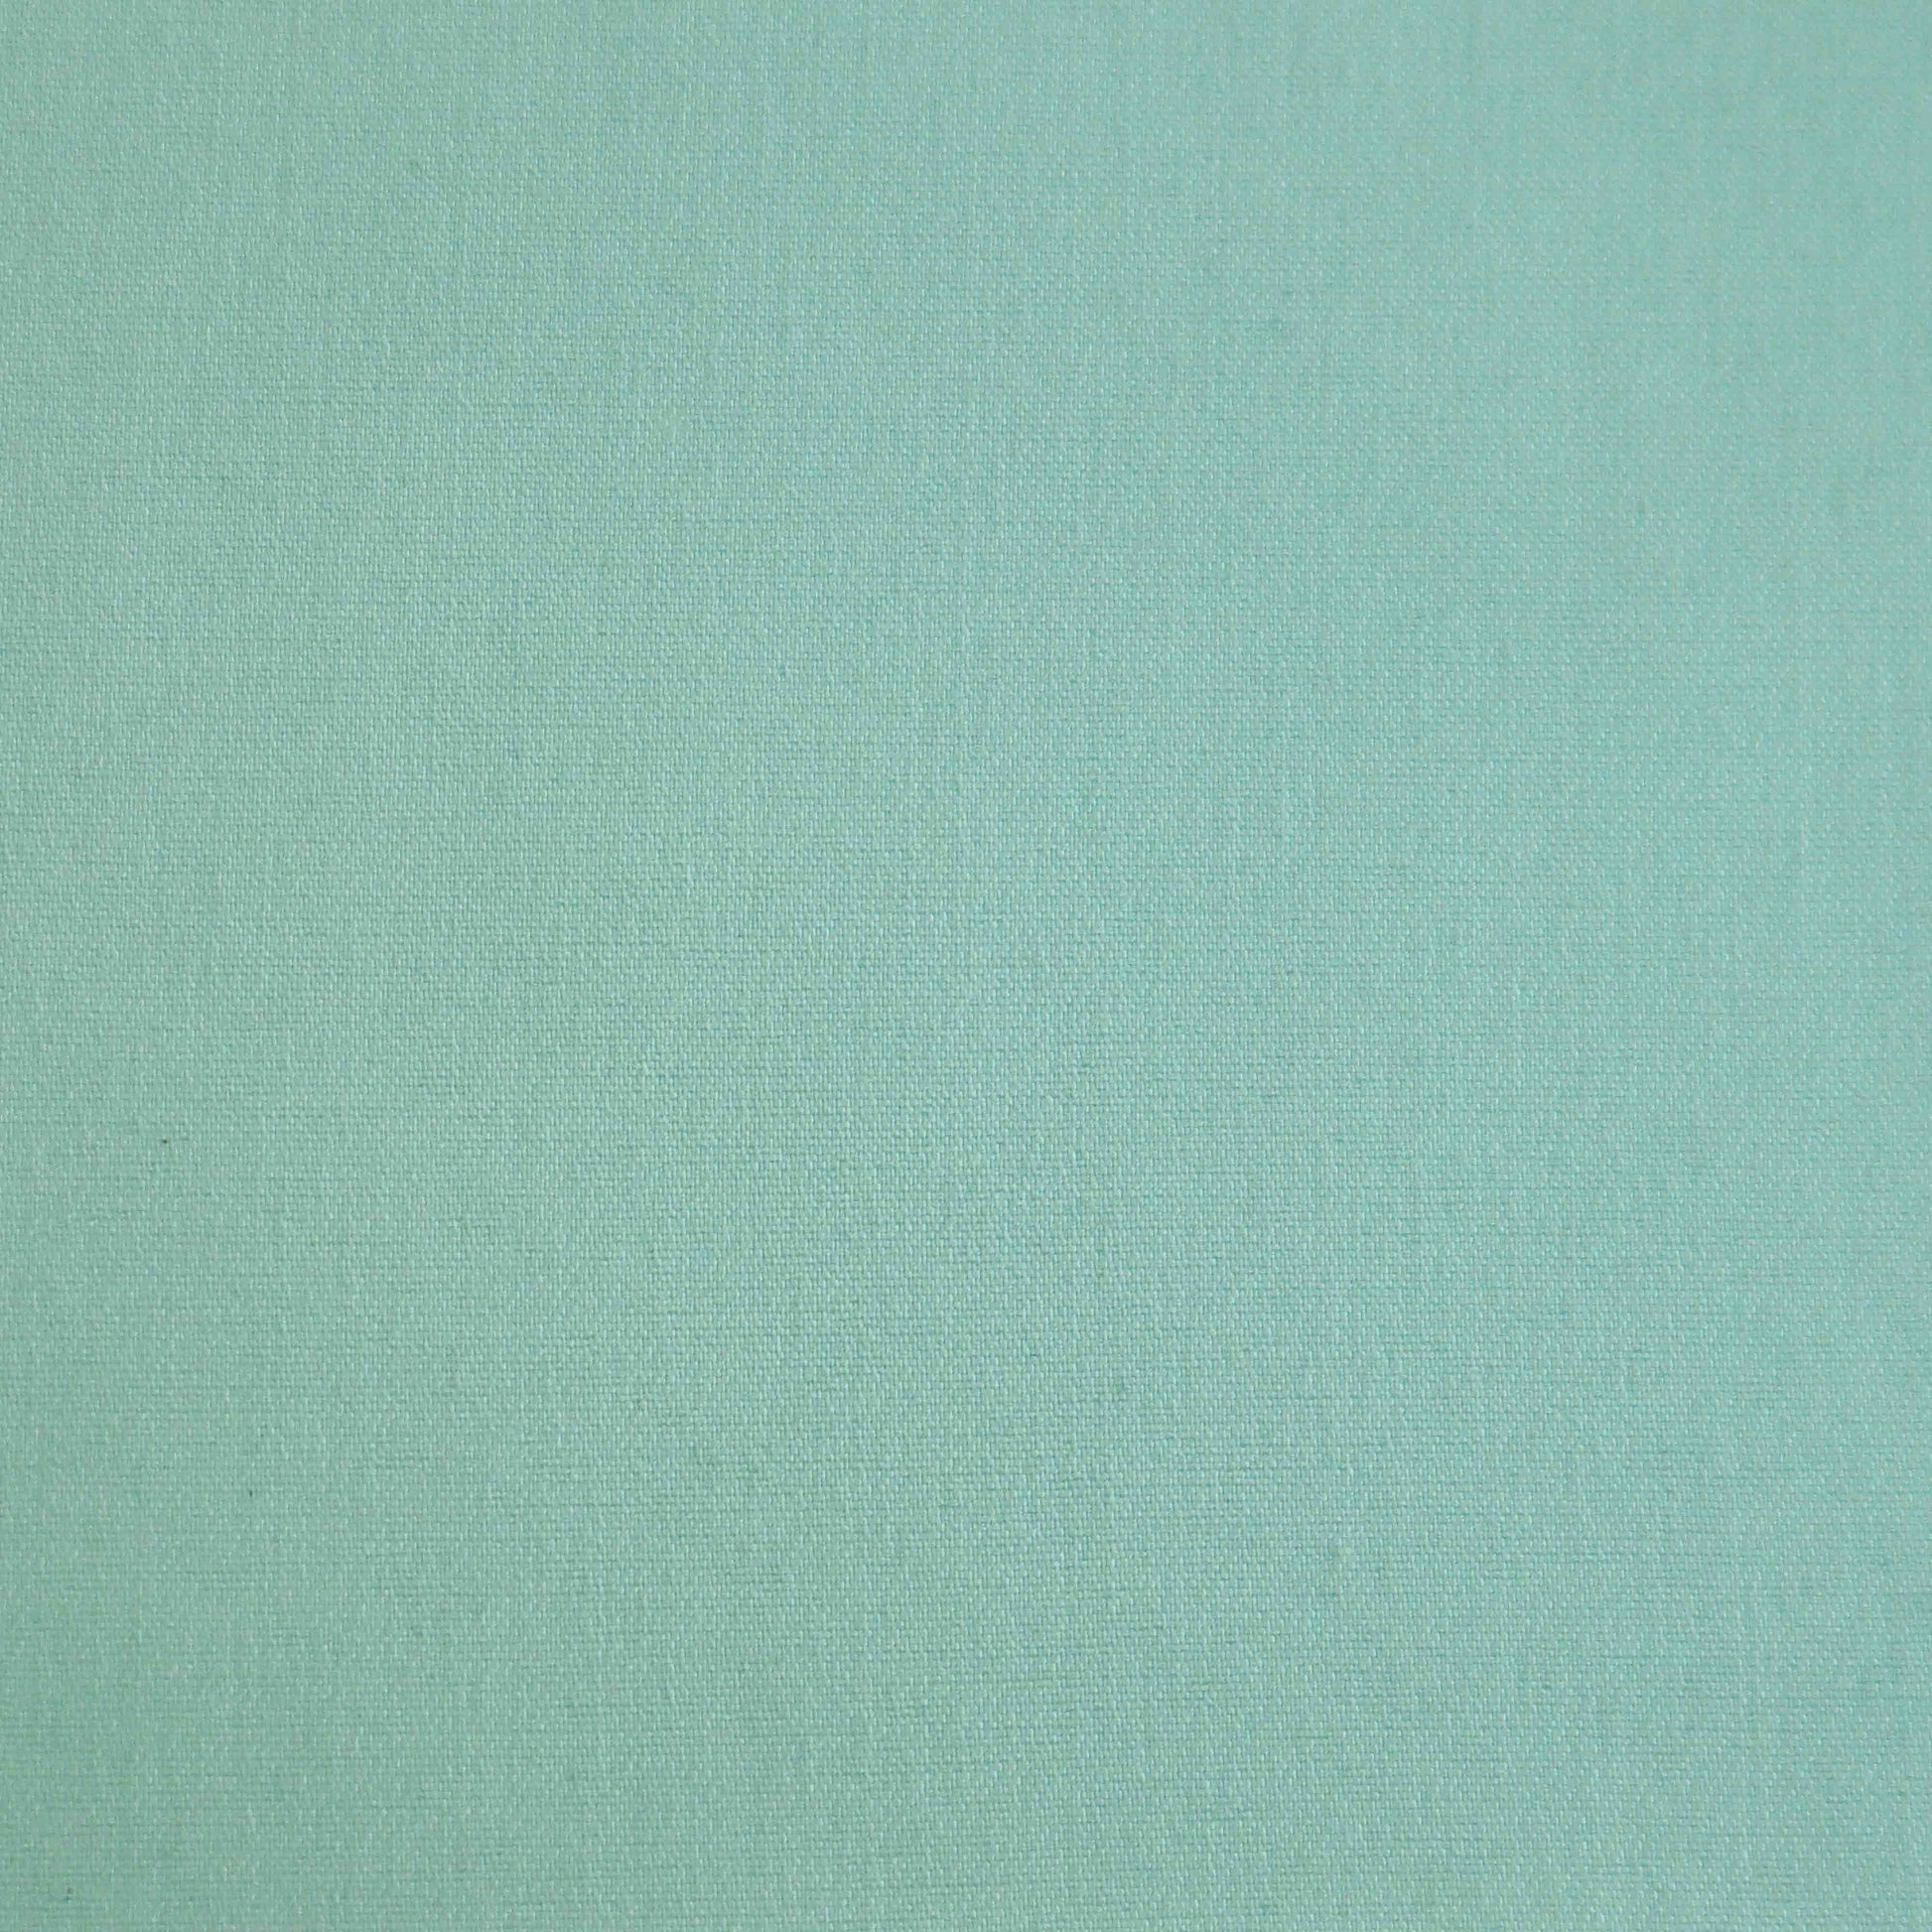 Lightweight Polyester Rayon fabric in Morning Mist (blue)